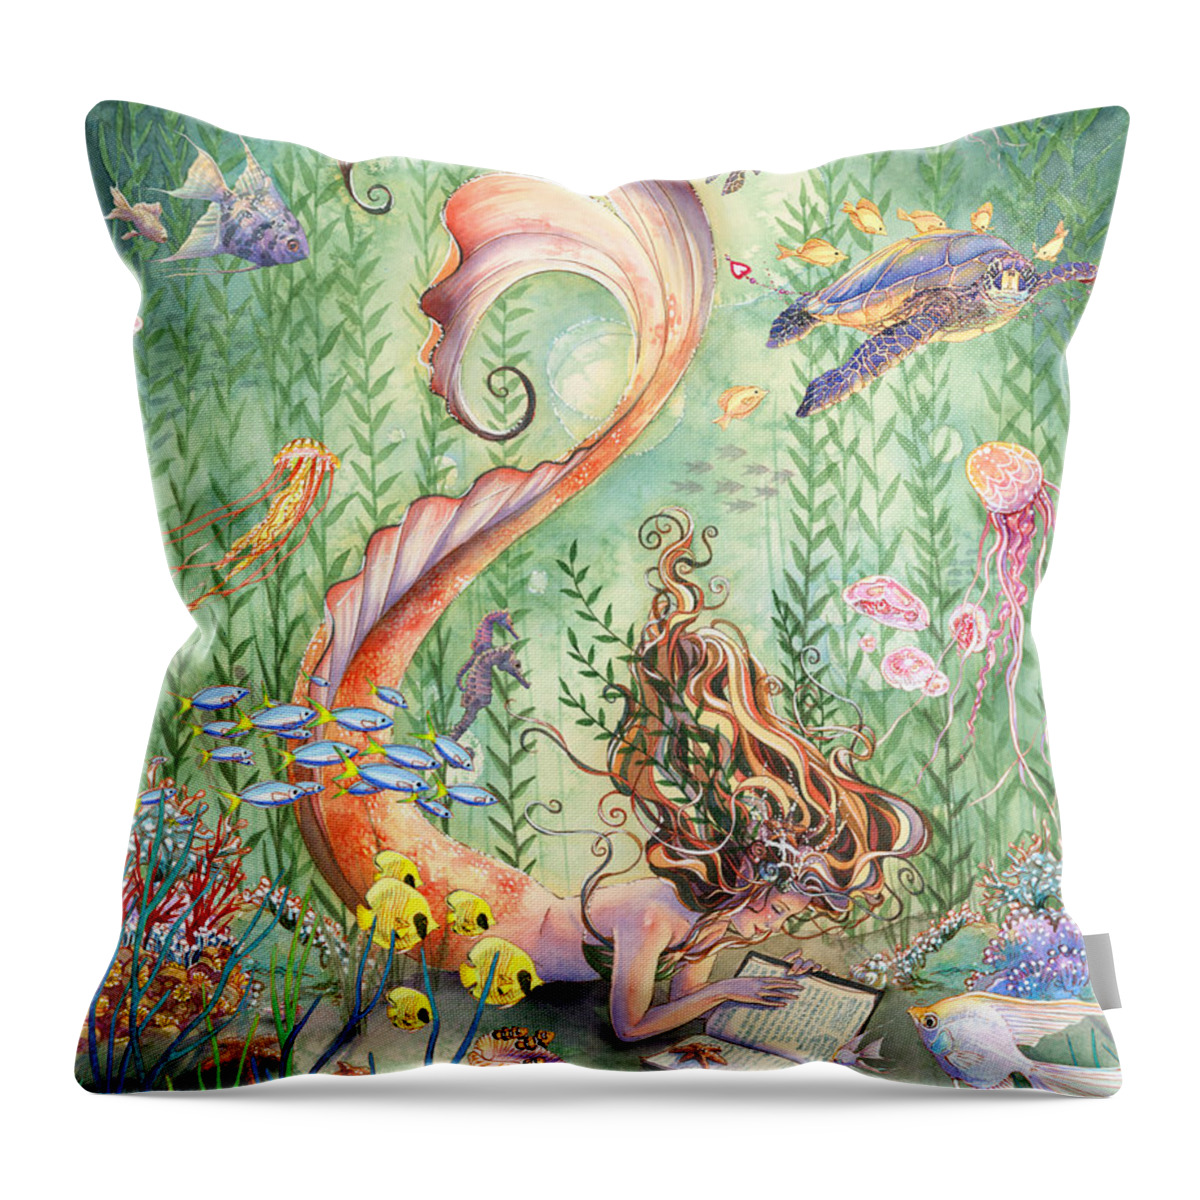 Mermaid Throw Pillow featuring the painting The Prayer by Sara Burrier